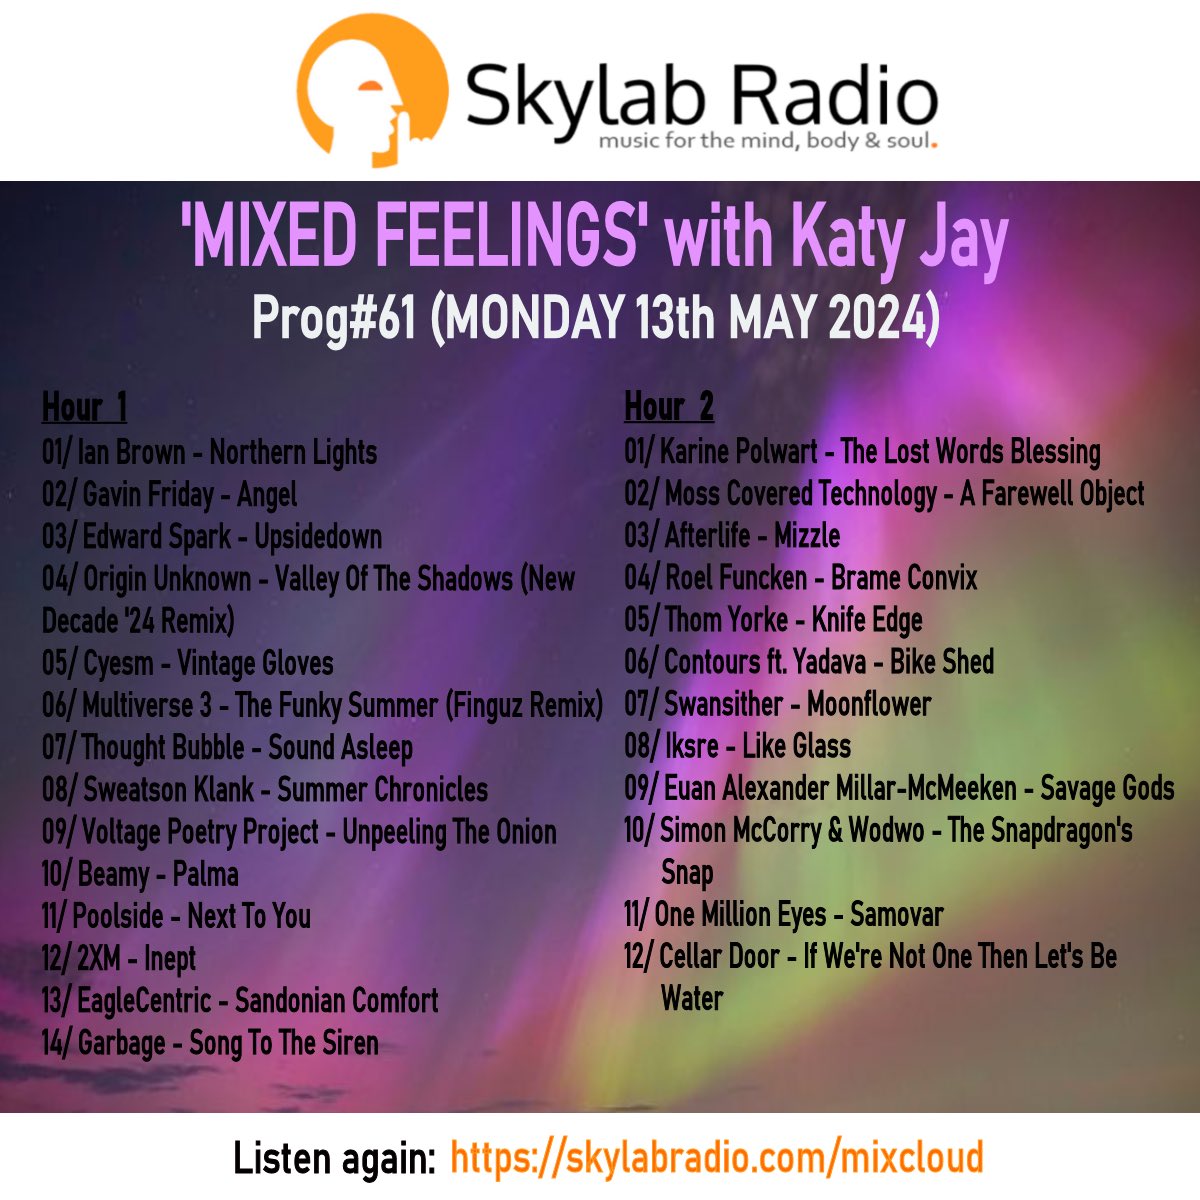 Here’s the tracklist for last nights brilliant #MixedFeelings with @KatySkylab. 

If you’ve missed this #MellowMay edition of Mixed Feelings… feel free to listen again right now via the Skylab Radio ‘On Demand’ page at…

skylabradio.com/mixcloud

Come fly with us? 🎧🧡